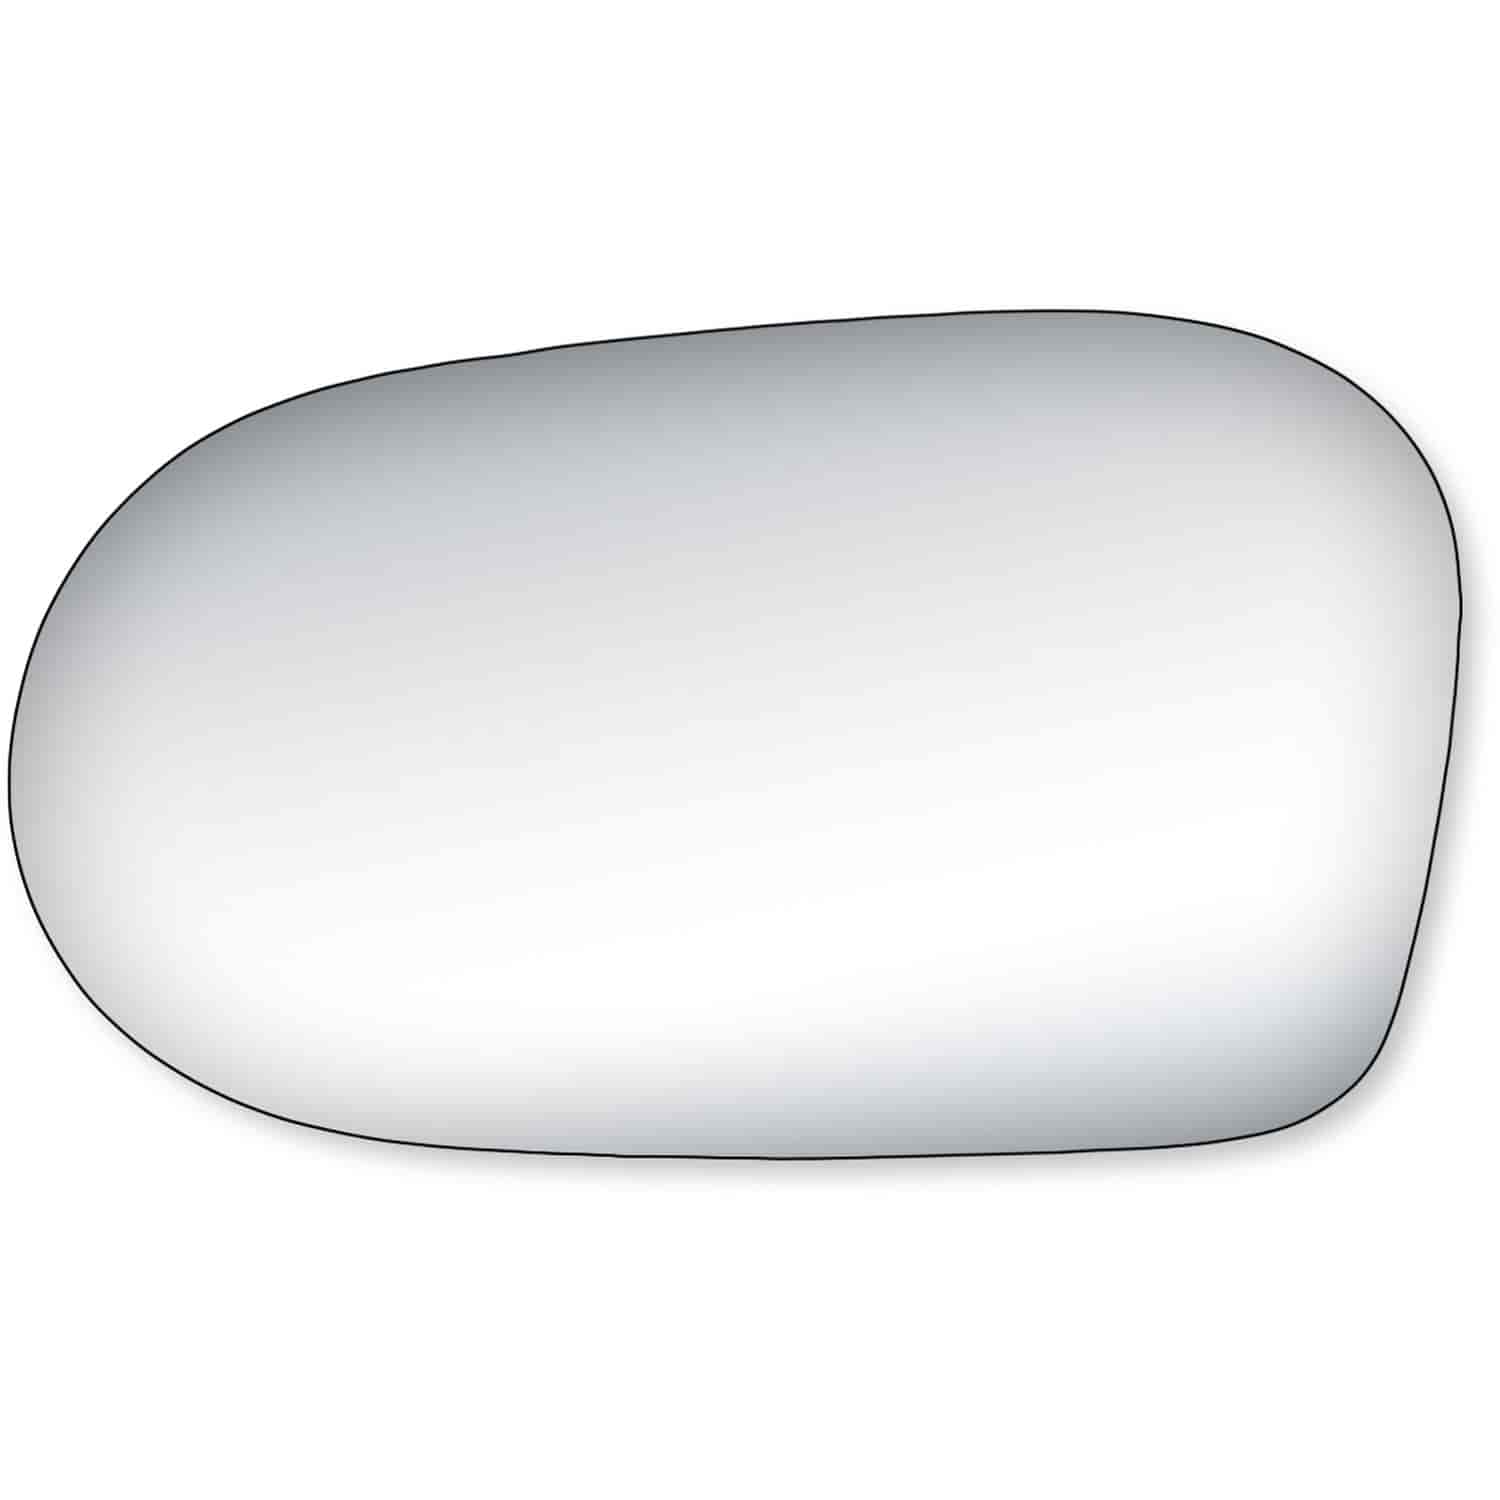 Replacement Glass for 91-99 Tercel 2 & 4 Door the glass measures 3 5/8 tall by 6 3/8 wide and 6 3/8